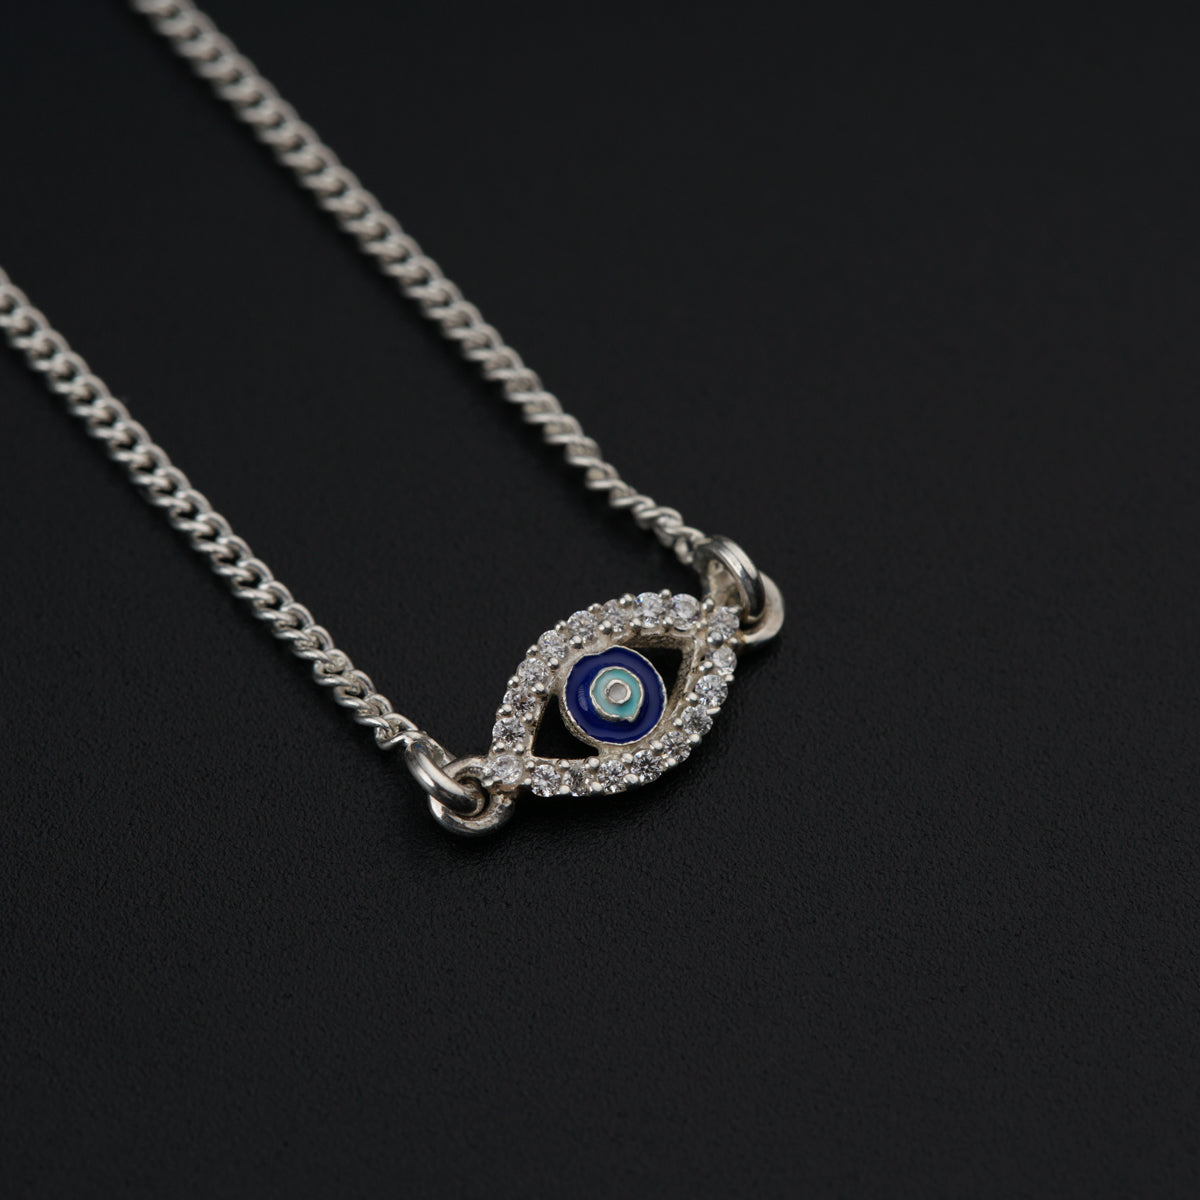 a blue evil eye necklace on a chain